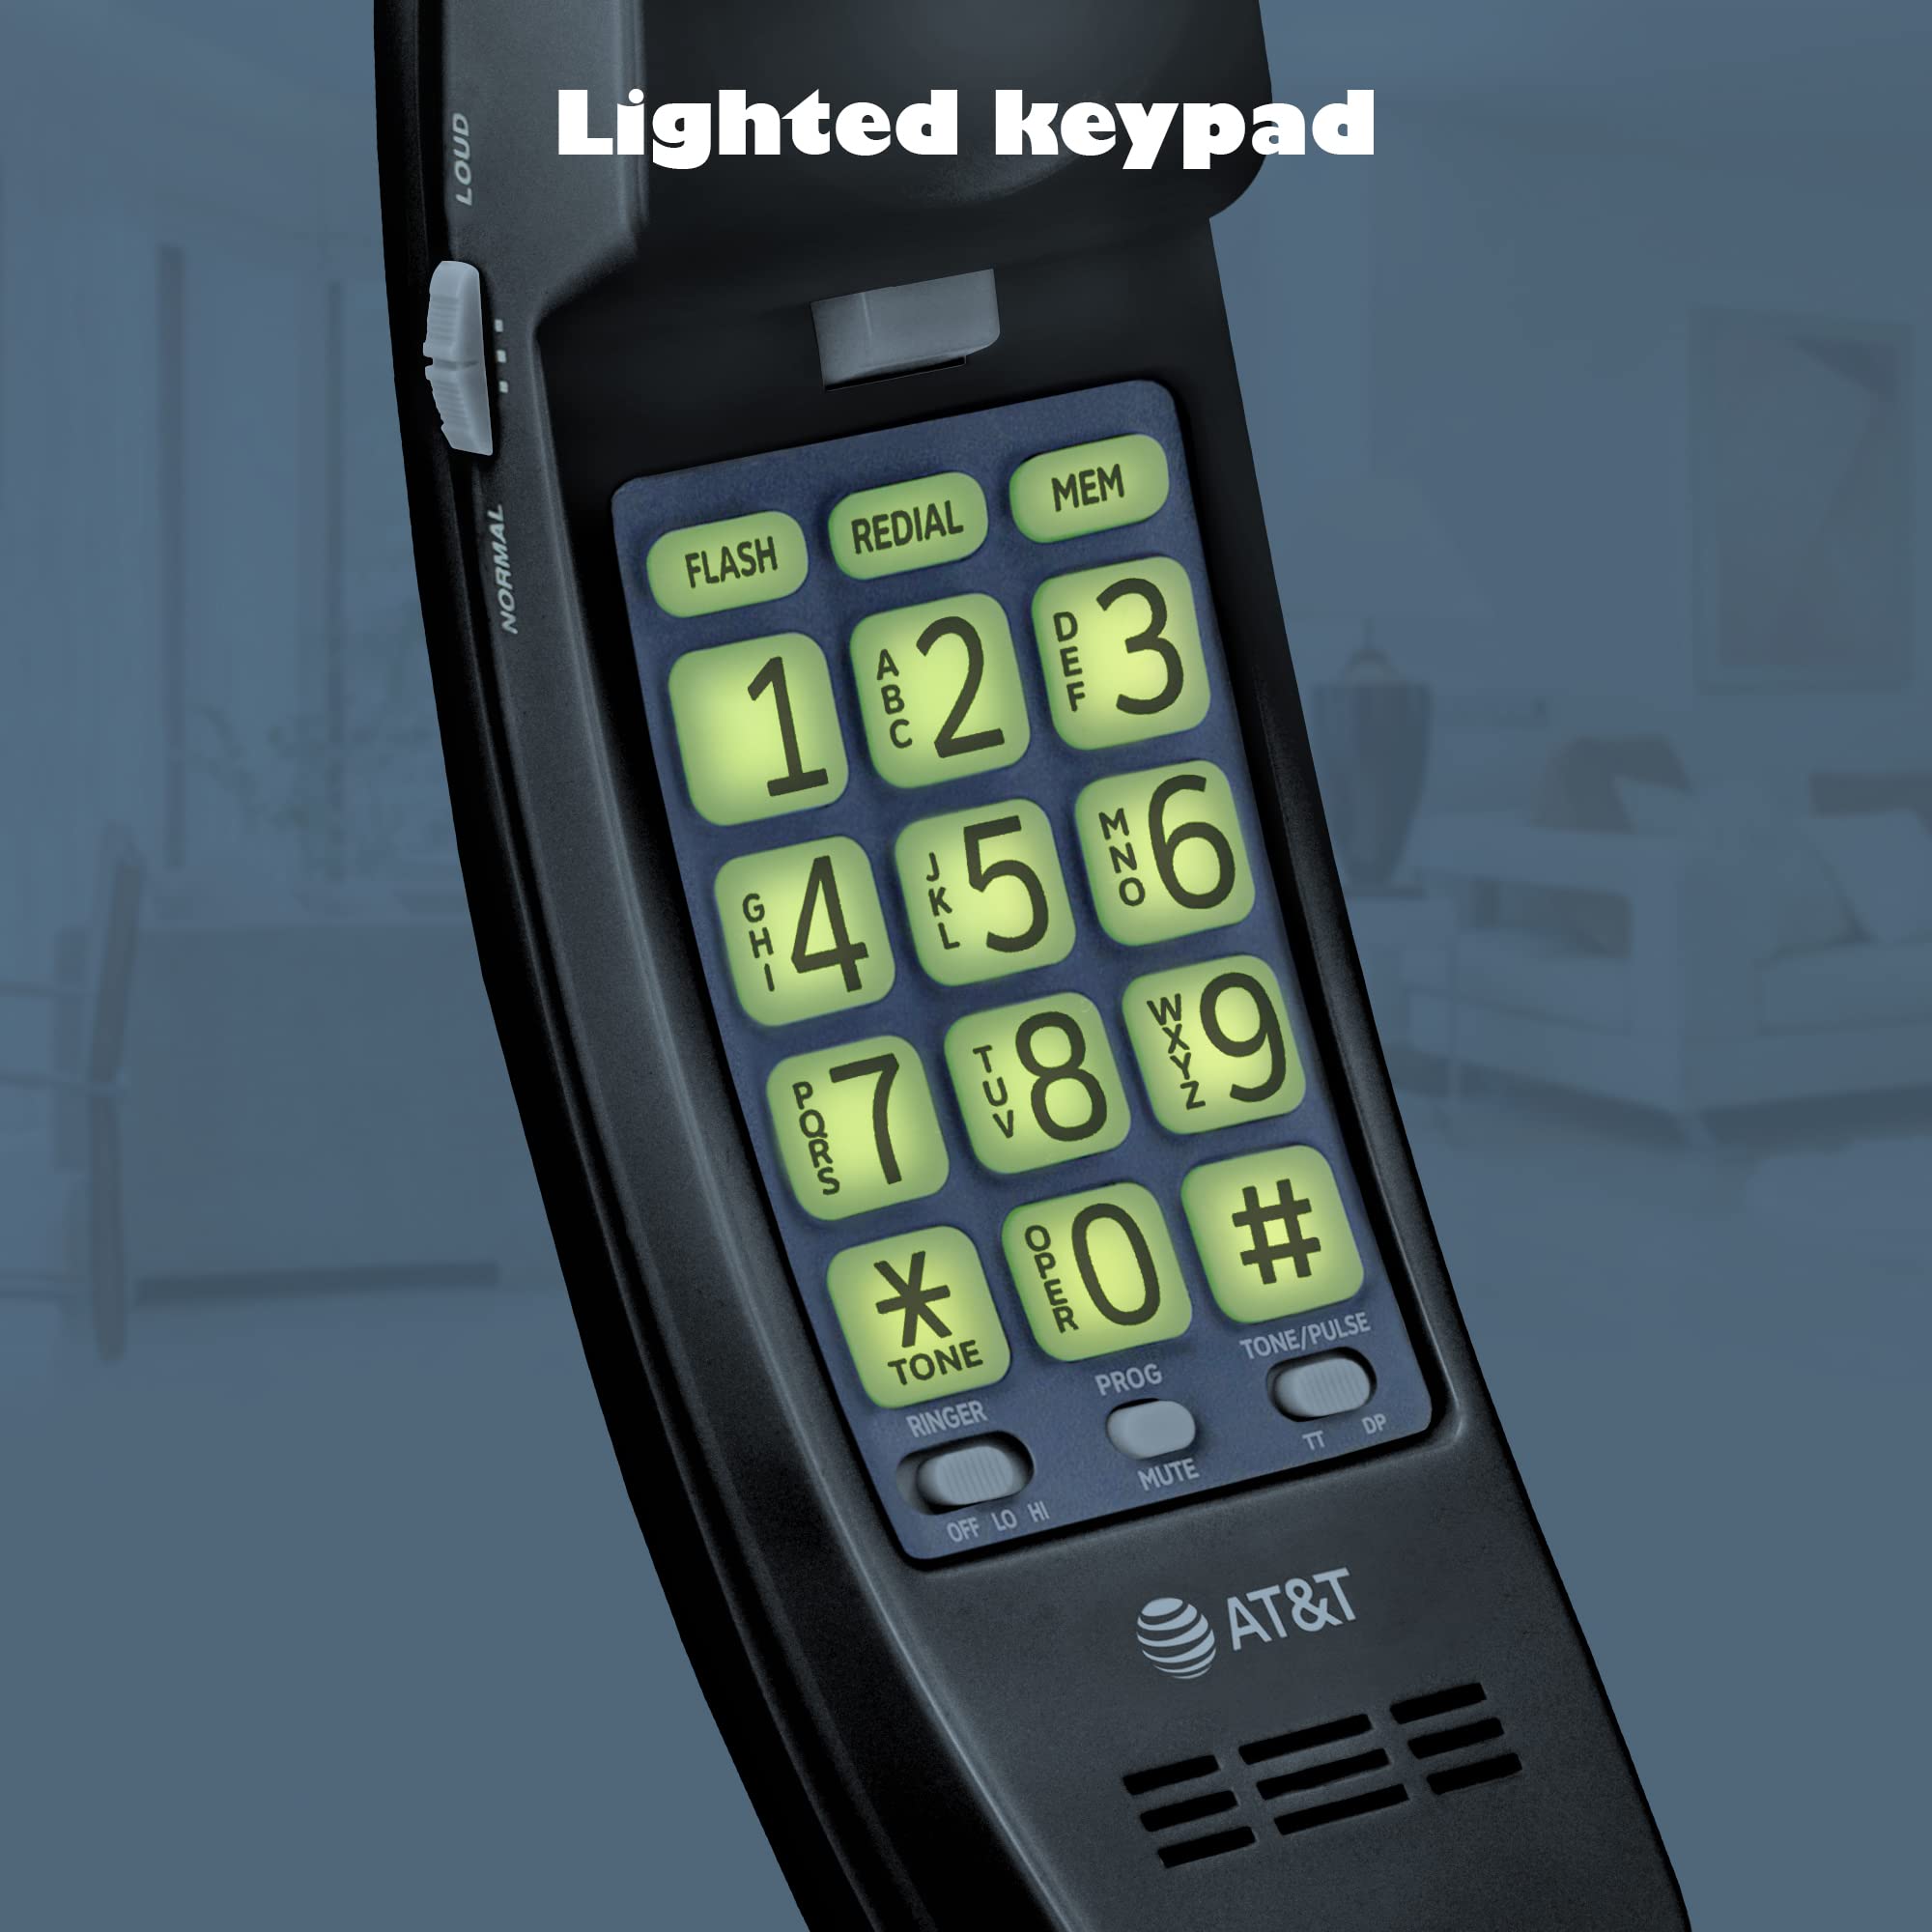 AT&T TRIMLINE 213-11 Corded Home Phone with Extra Big Buttons & Visual Ringer. No AC Power Required, Improved Easy-wall-mount, Lighted Keypad, 10 Speed Dial Keys, Volume Control,Senior Friendly. BLACK